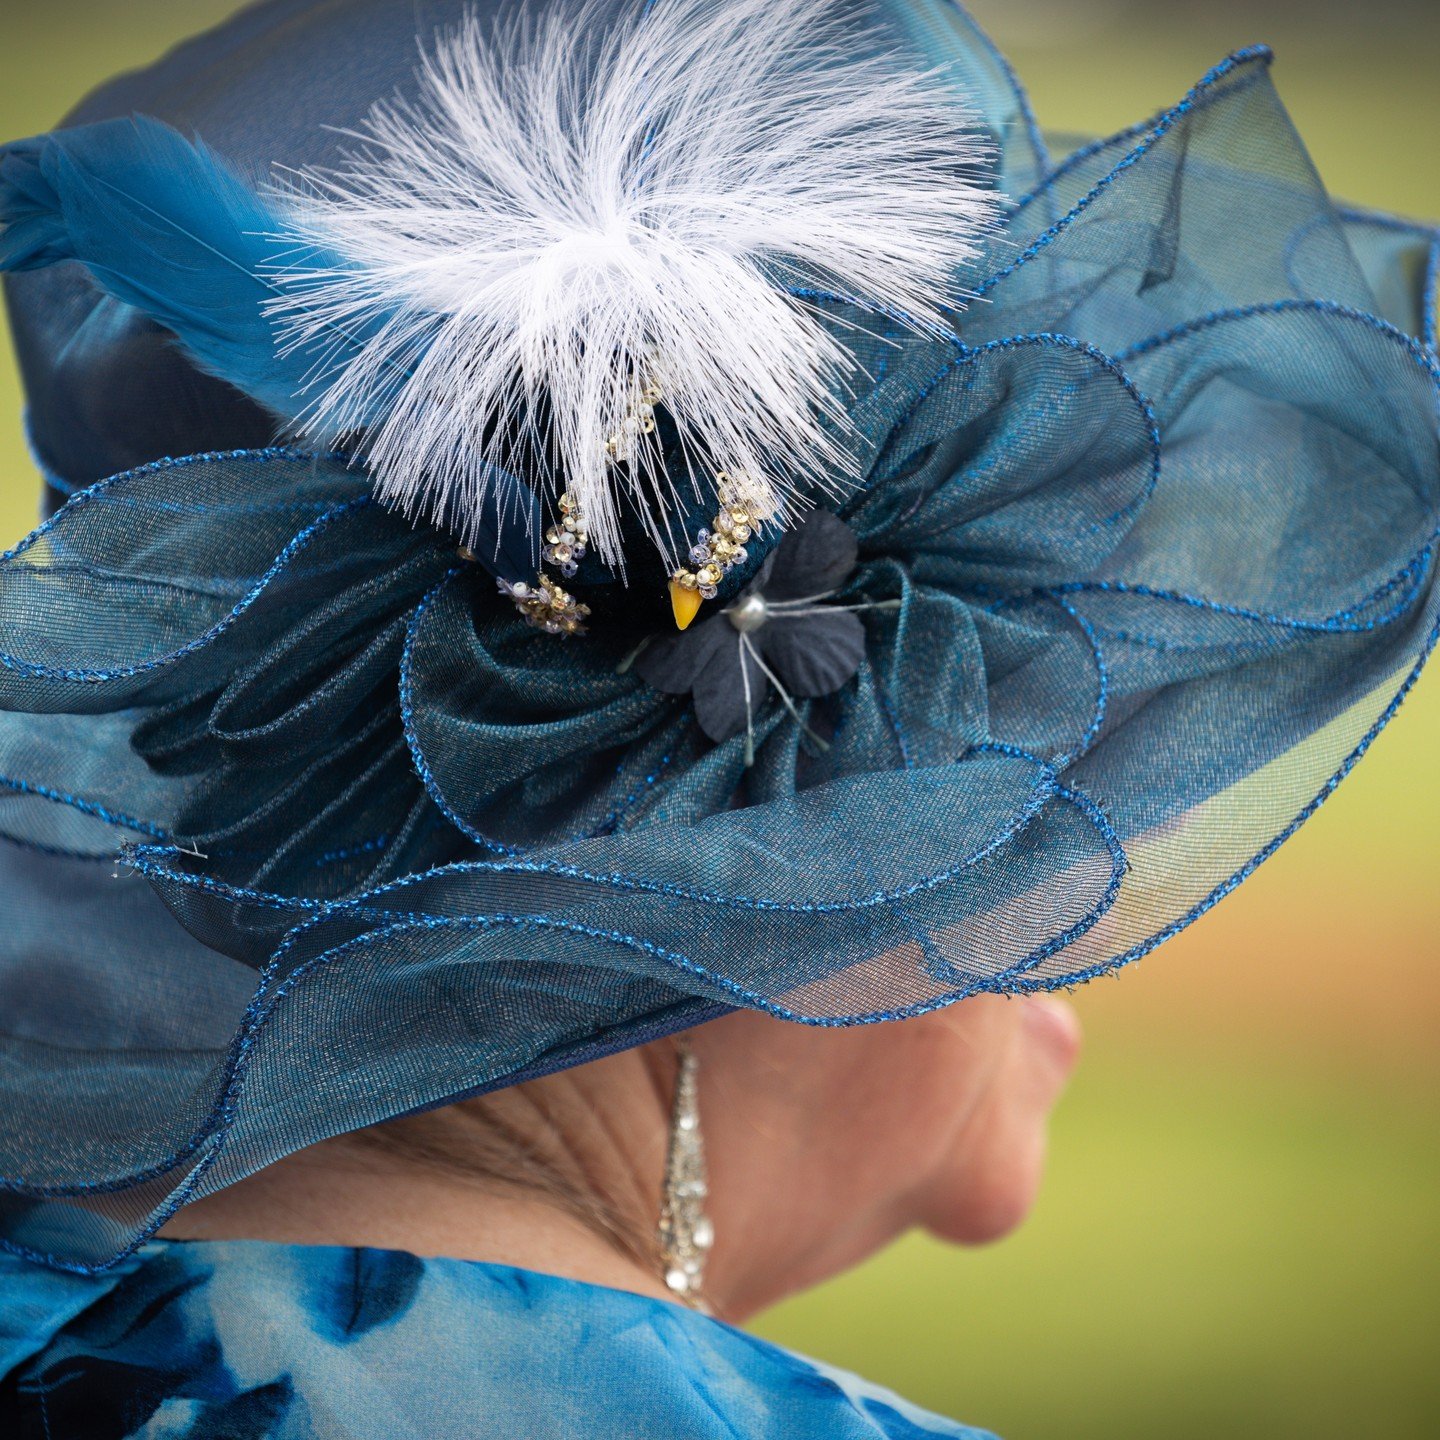 How's your Hat Game? @riobranner has you covered for the KELOWNA POLO CLASSIC this June 29th! Polo is a great reason to have more hats just in time for summer #pololife #KelownaEvents #HatGame #OkanaganLife